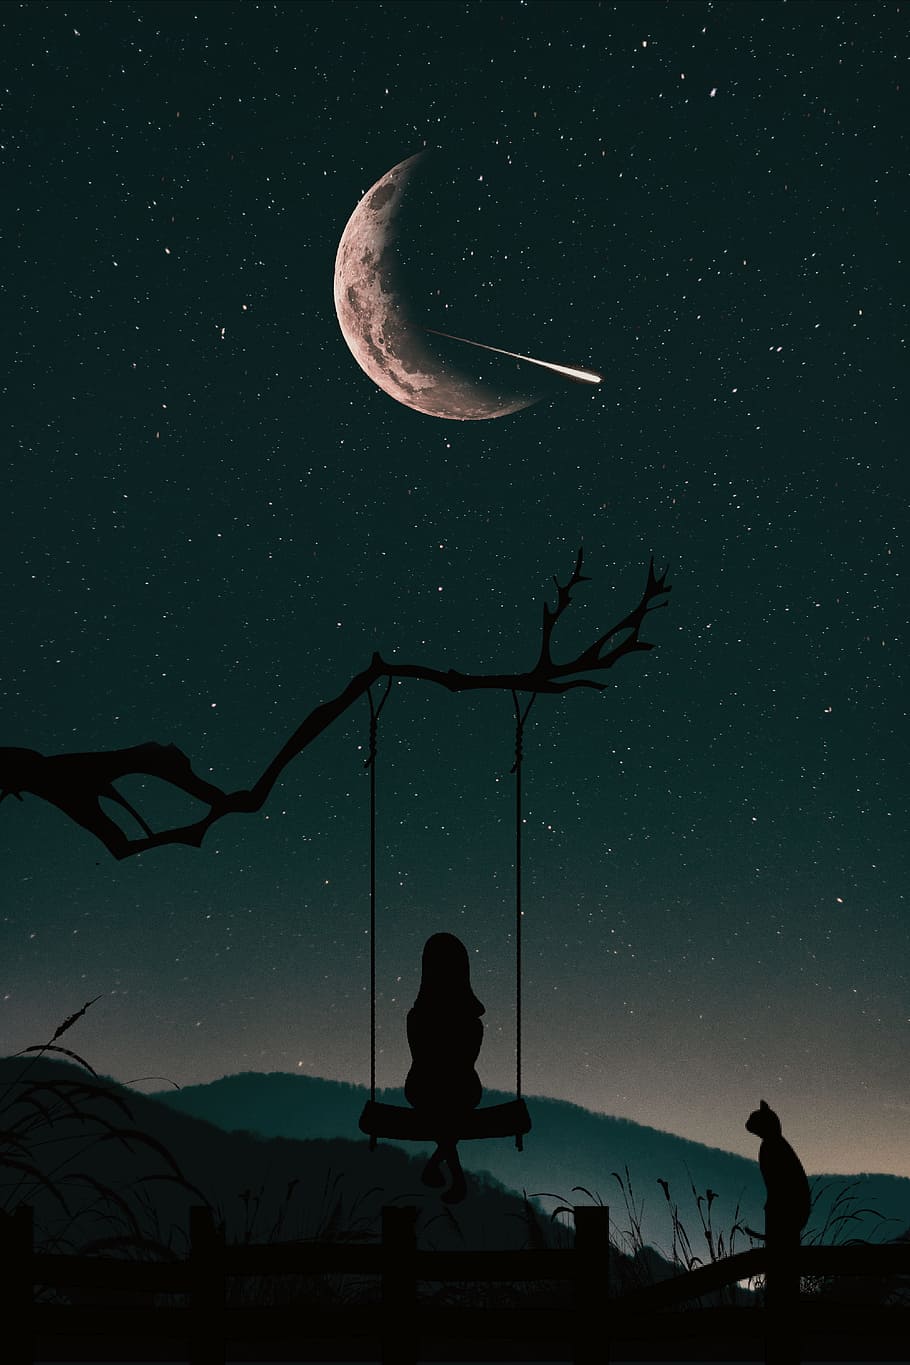 silhouette of girl sitting on swing fixed to a tree branch under bright starry night sky with crescent moon illustration, HD wallpaper